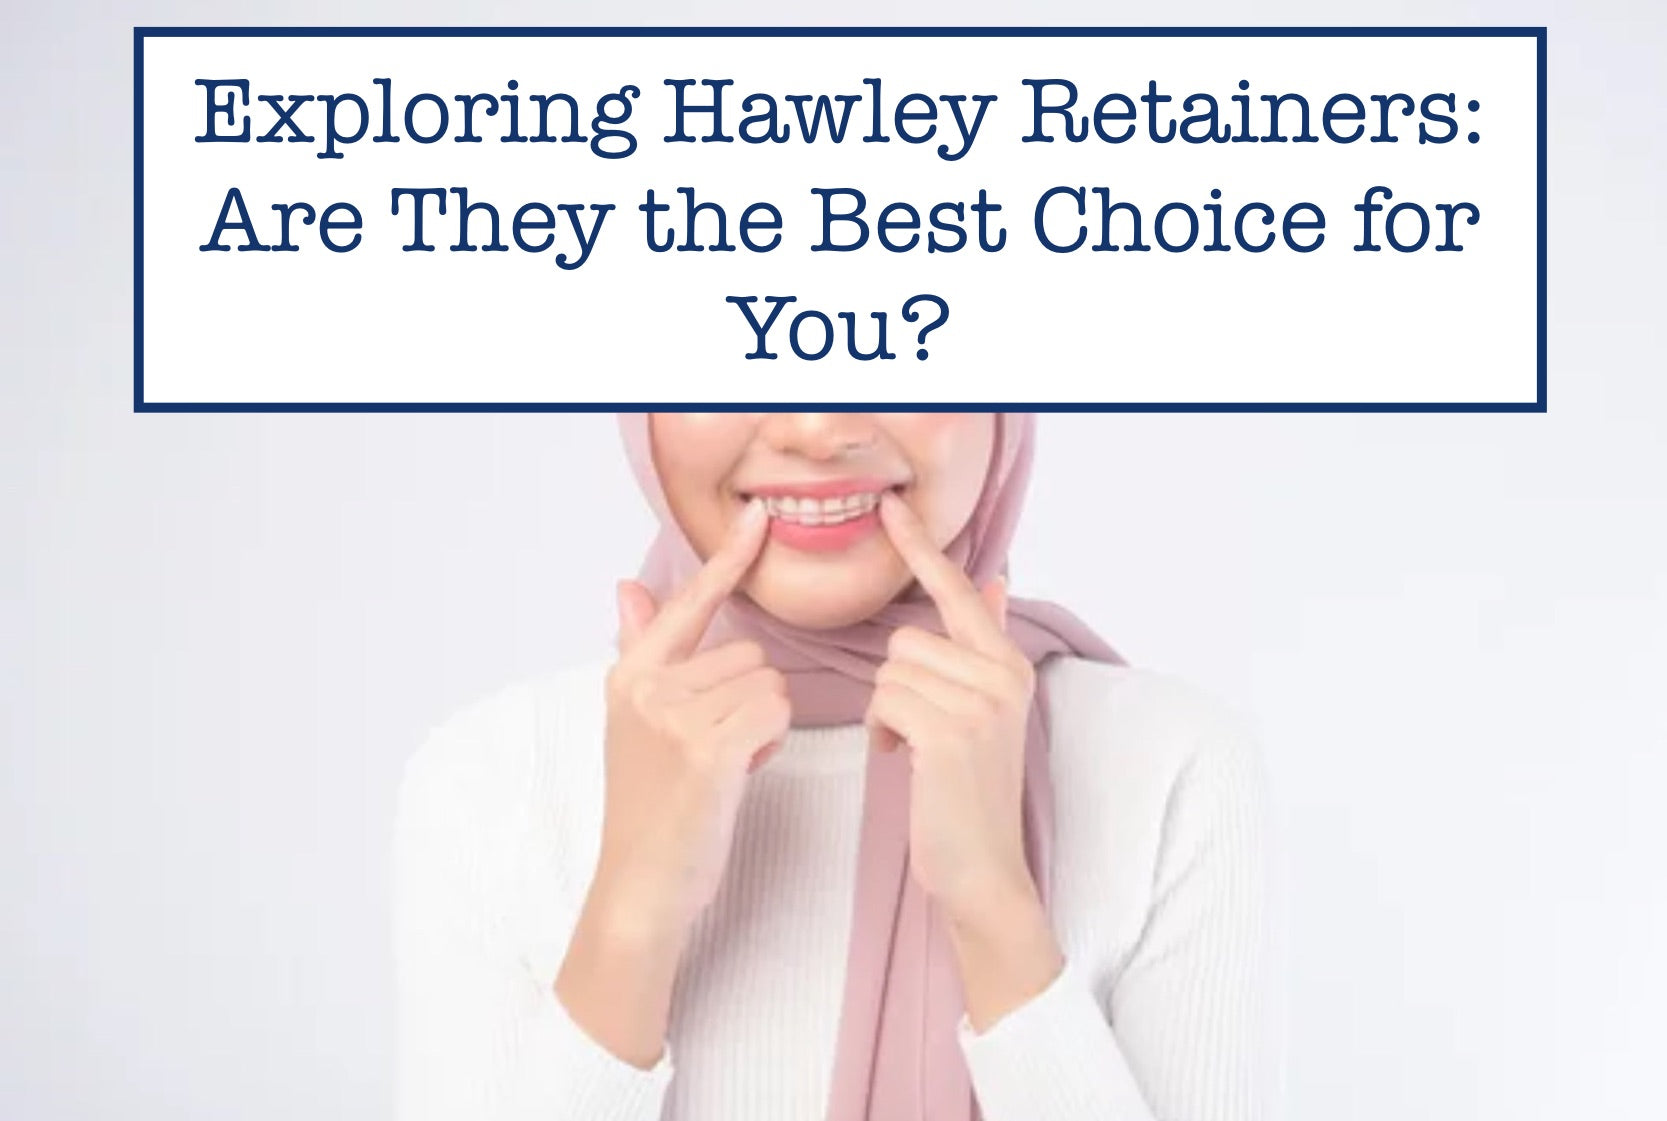 Exploring Hawley Retainers: Are They the Best Choice for You?